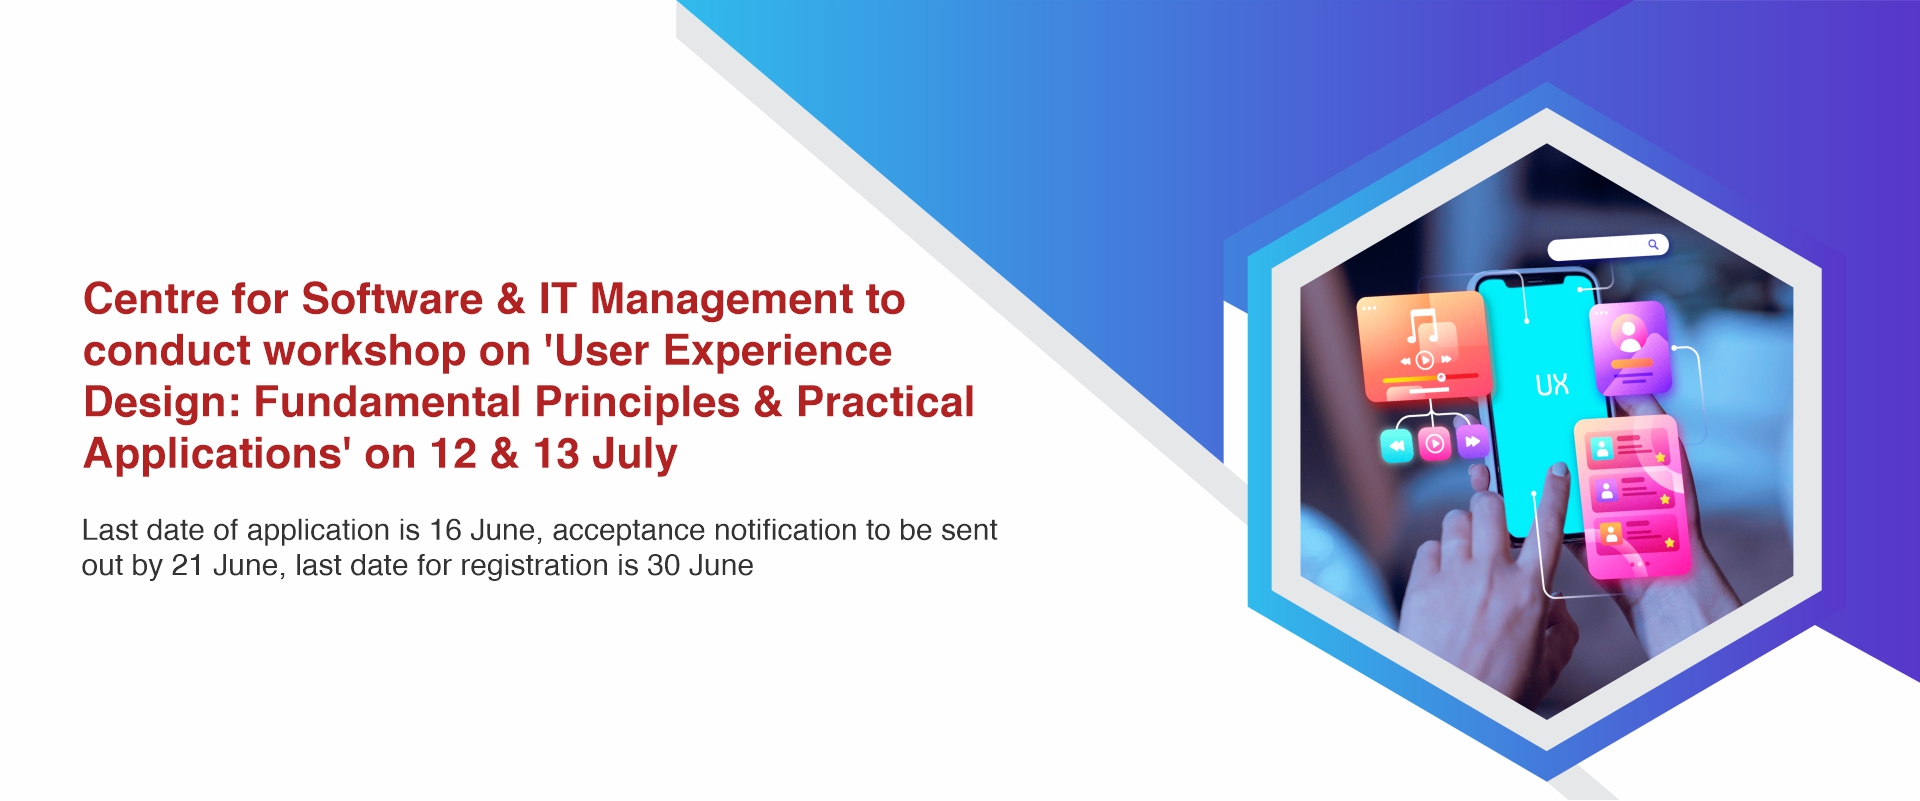 Centre for Software & IT Management to conduct workshop on ‘User Experience Design: Fundamental Principles & Practical Applications’ on 12th & 13th July 